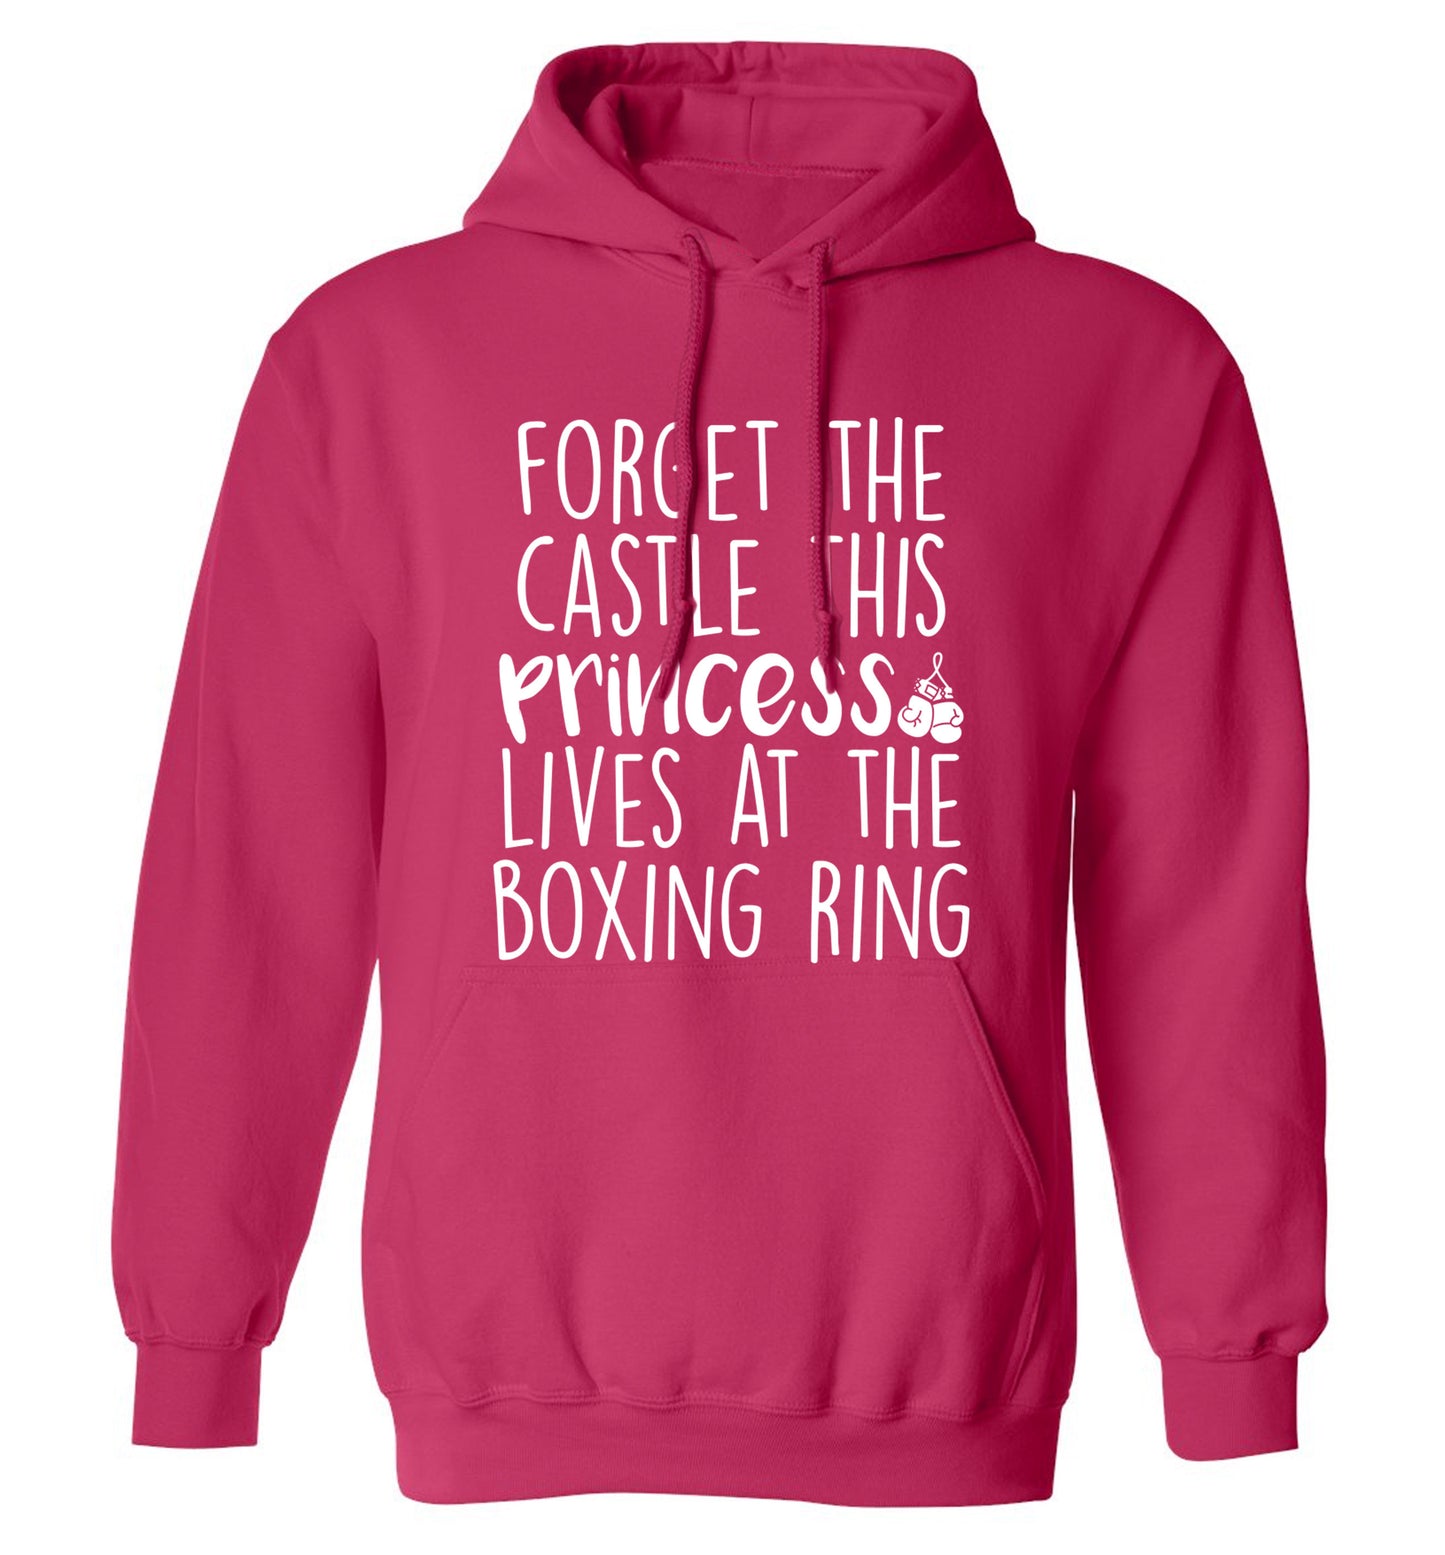 Forget the castle this princess lives at the boxing ring adults unisex pink hoodie 2XL